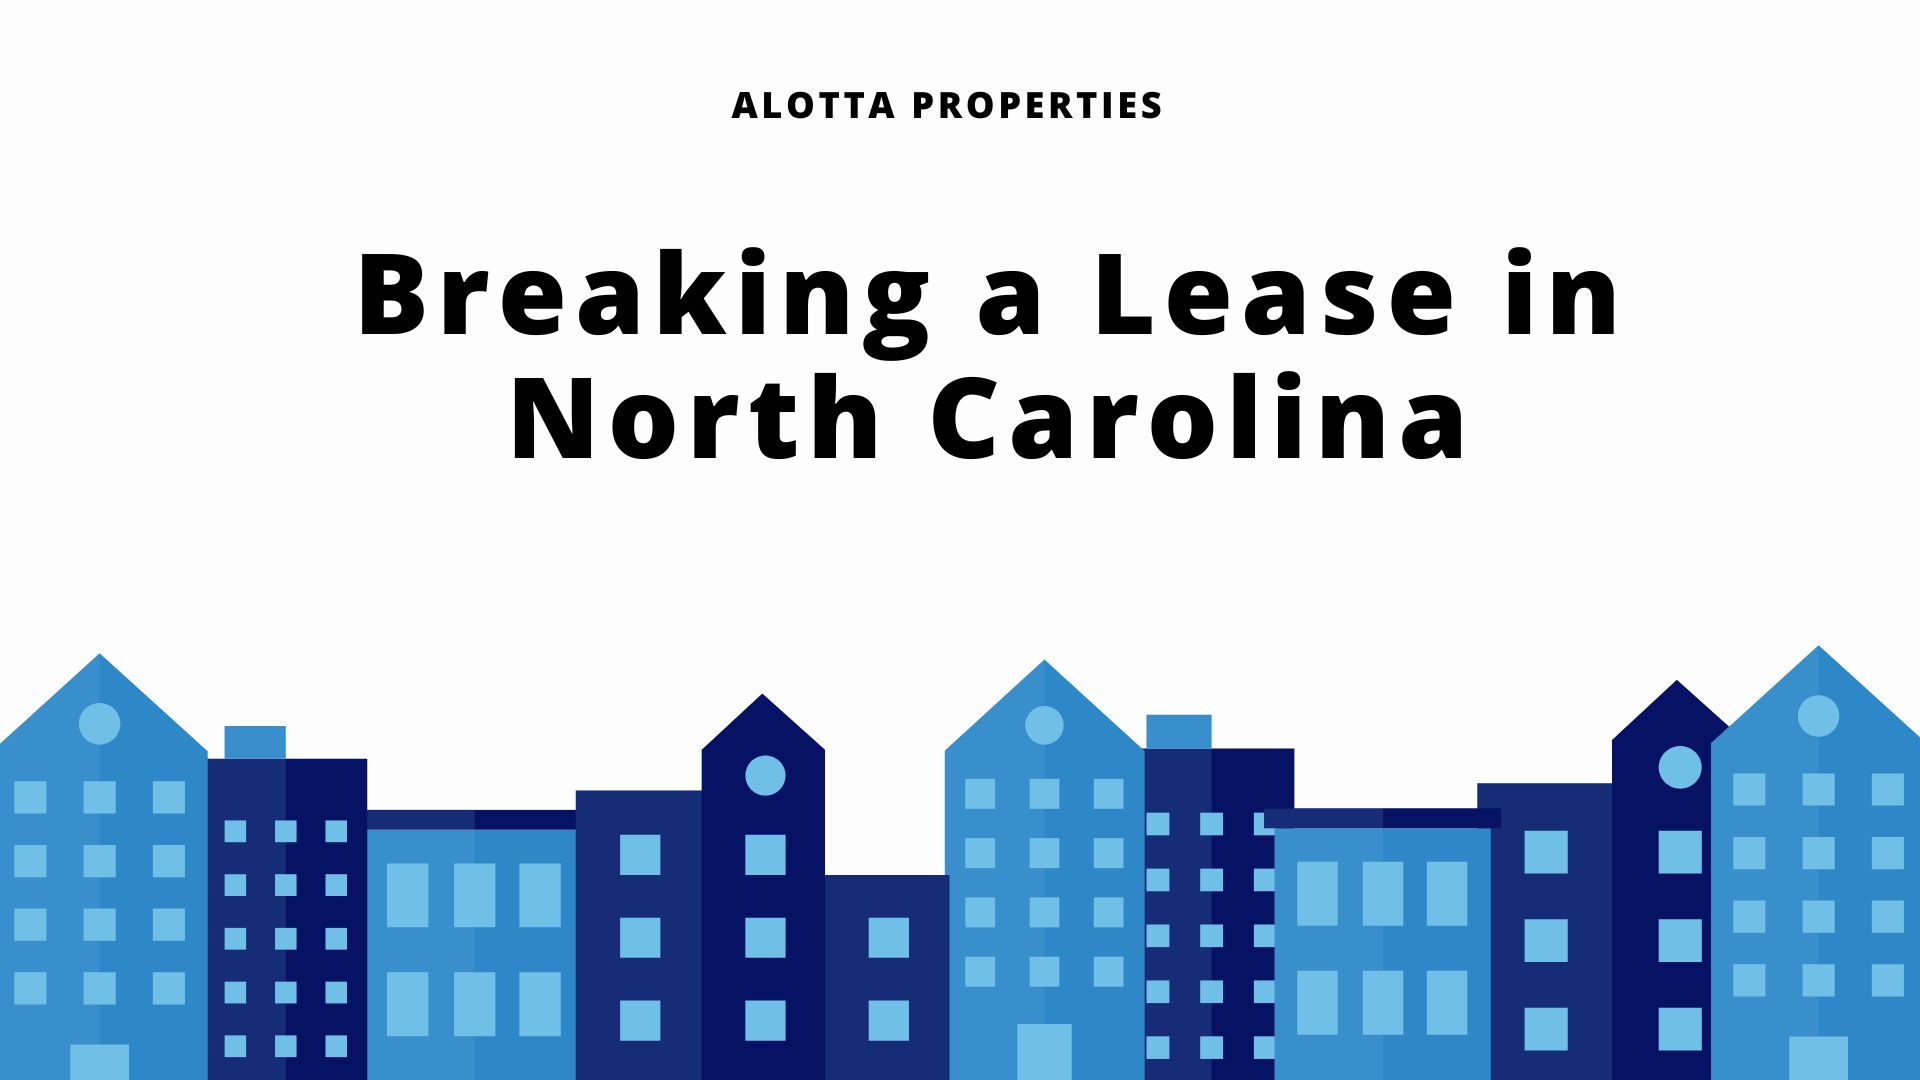 Breaking a Lease in North Carolina - Know the Laws